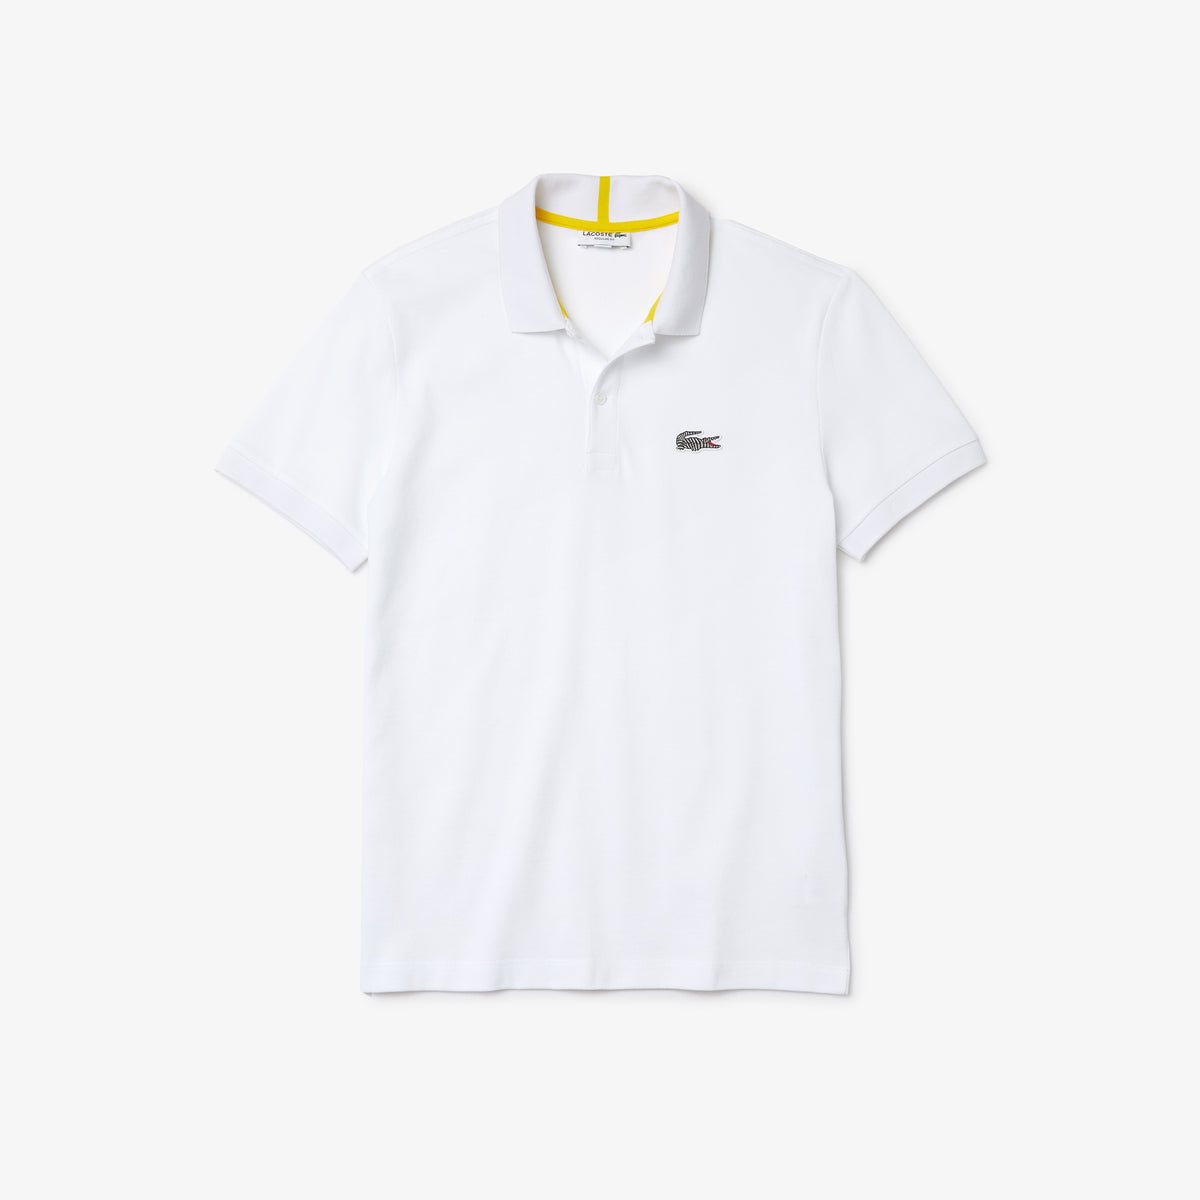 Men's Lacoste x National Geographic Animal Printed Croc Polo Shirt ...